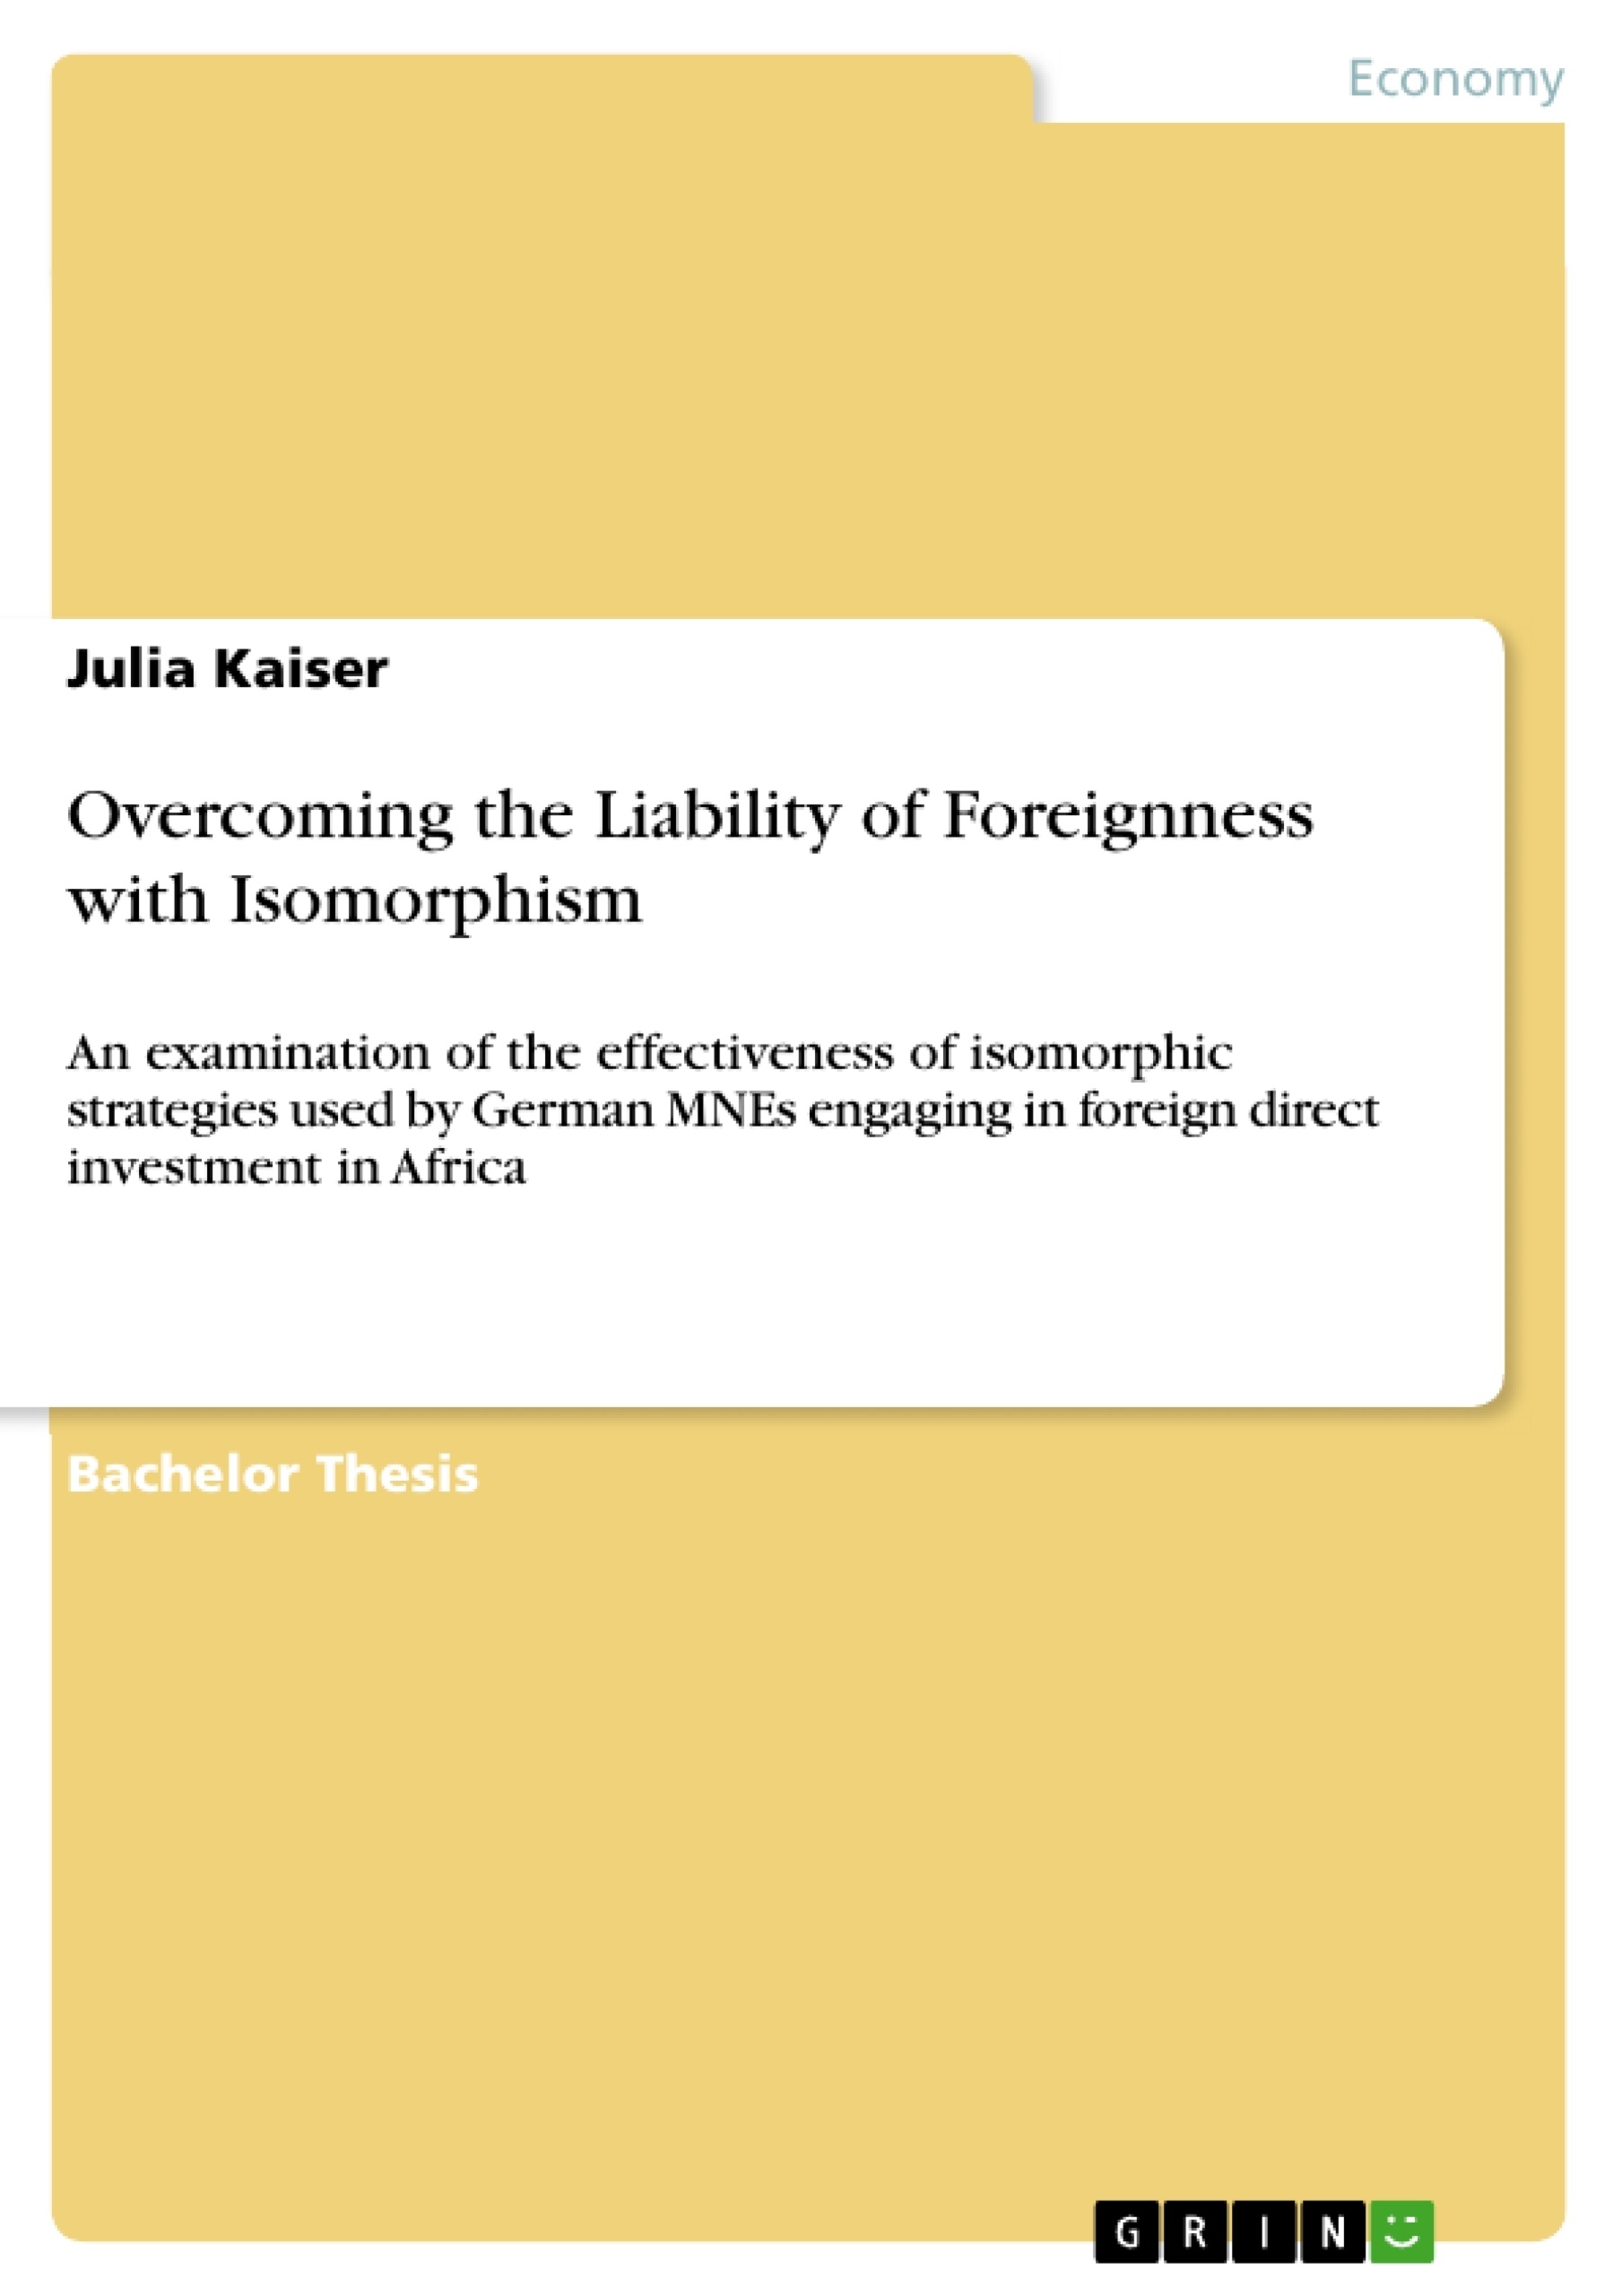 Title: Overcoming the Liability of Foreignness with Isomorphism